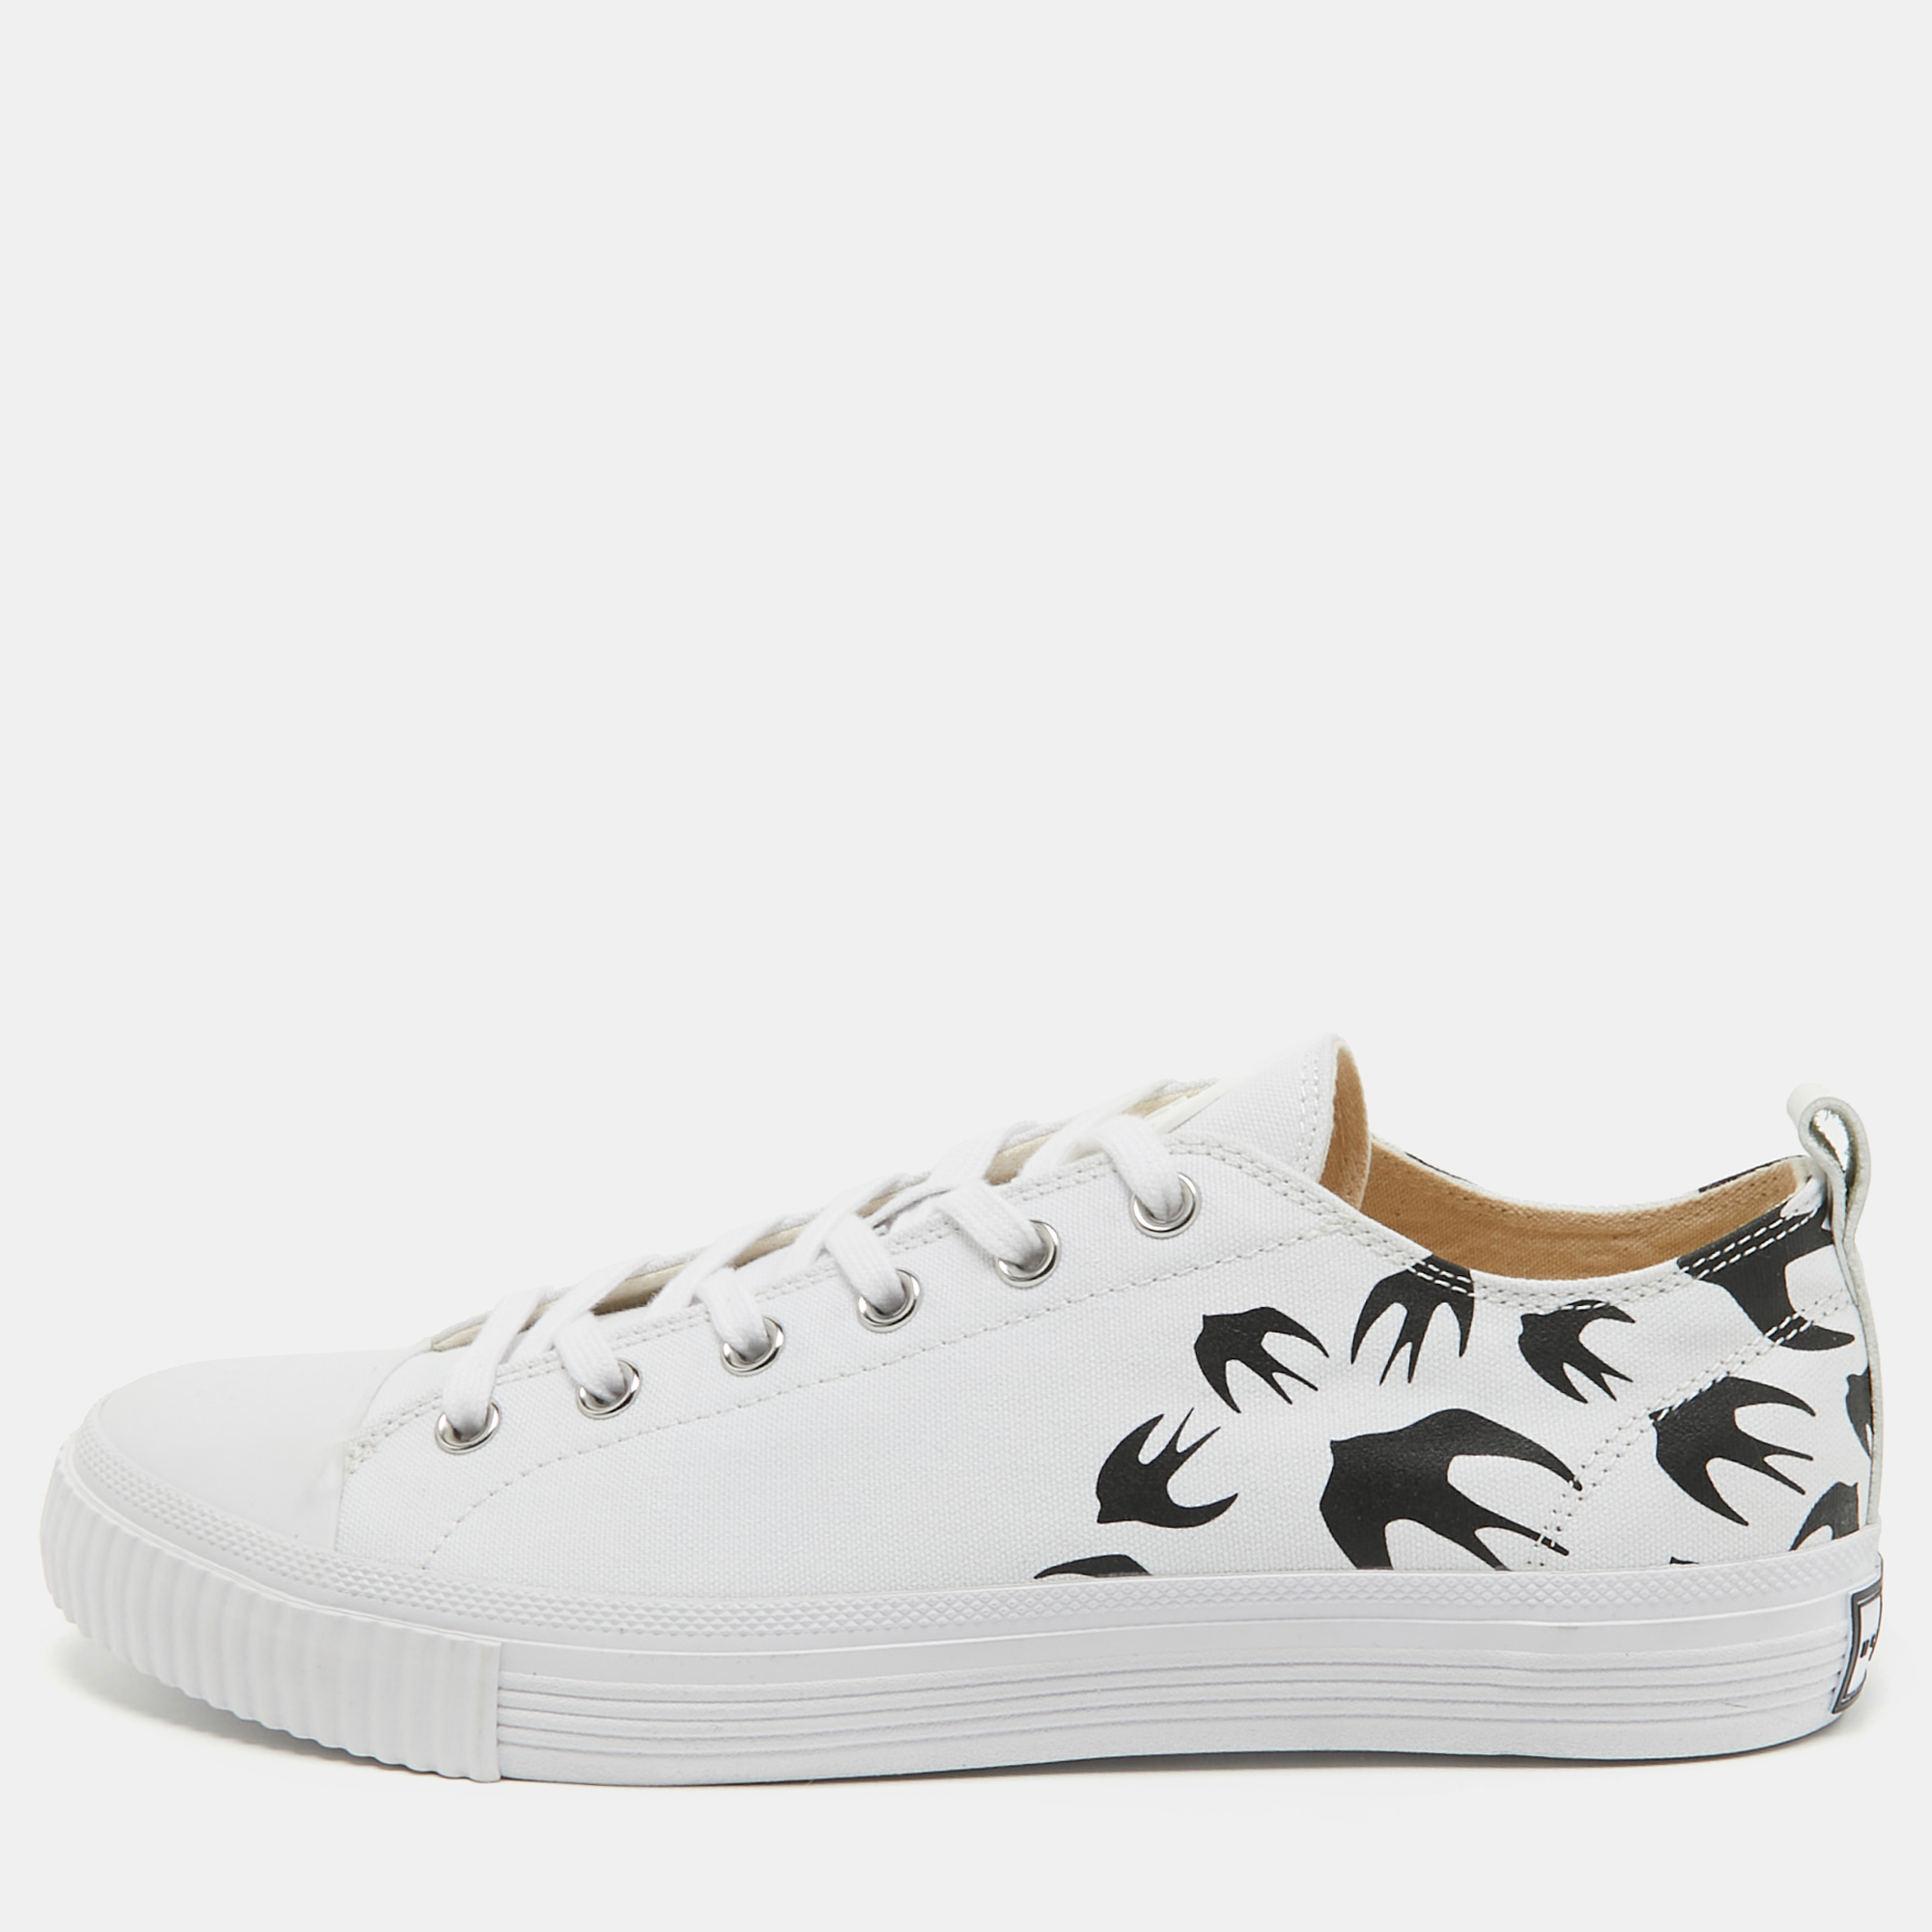 

McQ by Alexander McQueen White Canvas Swallow Sneakers Size